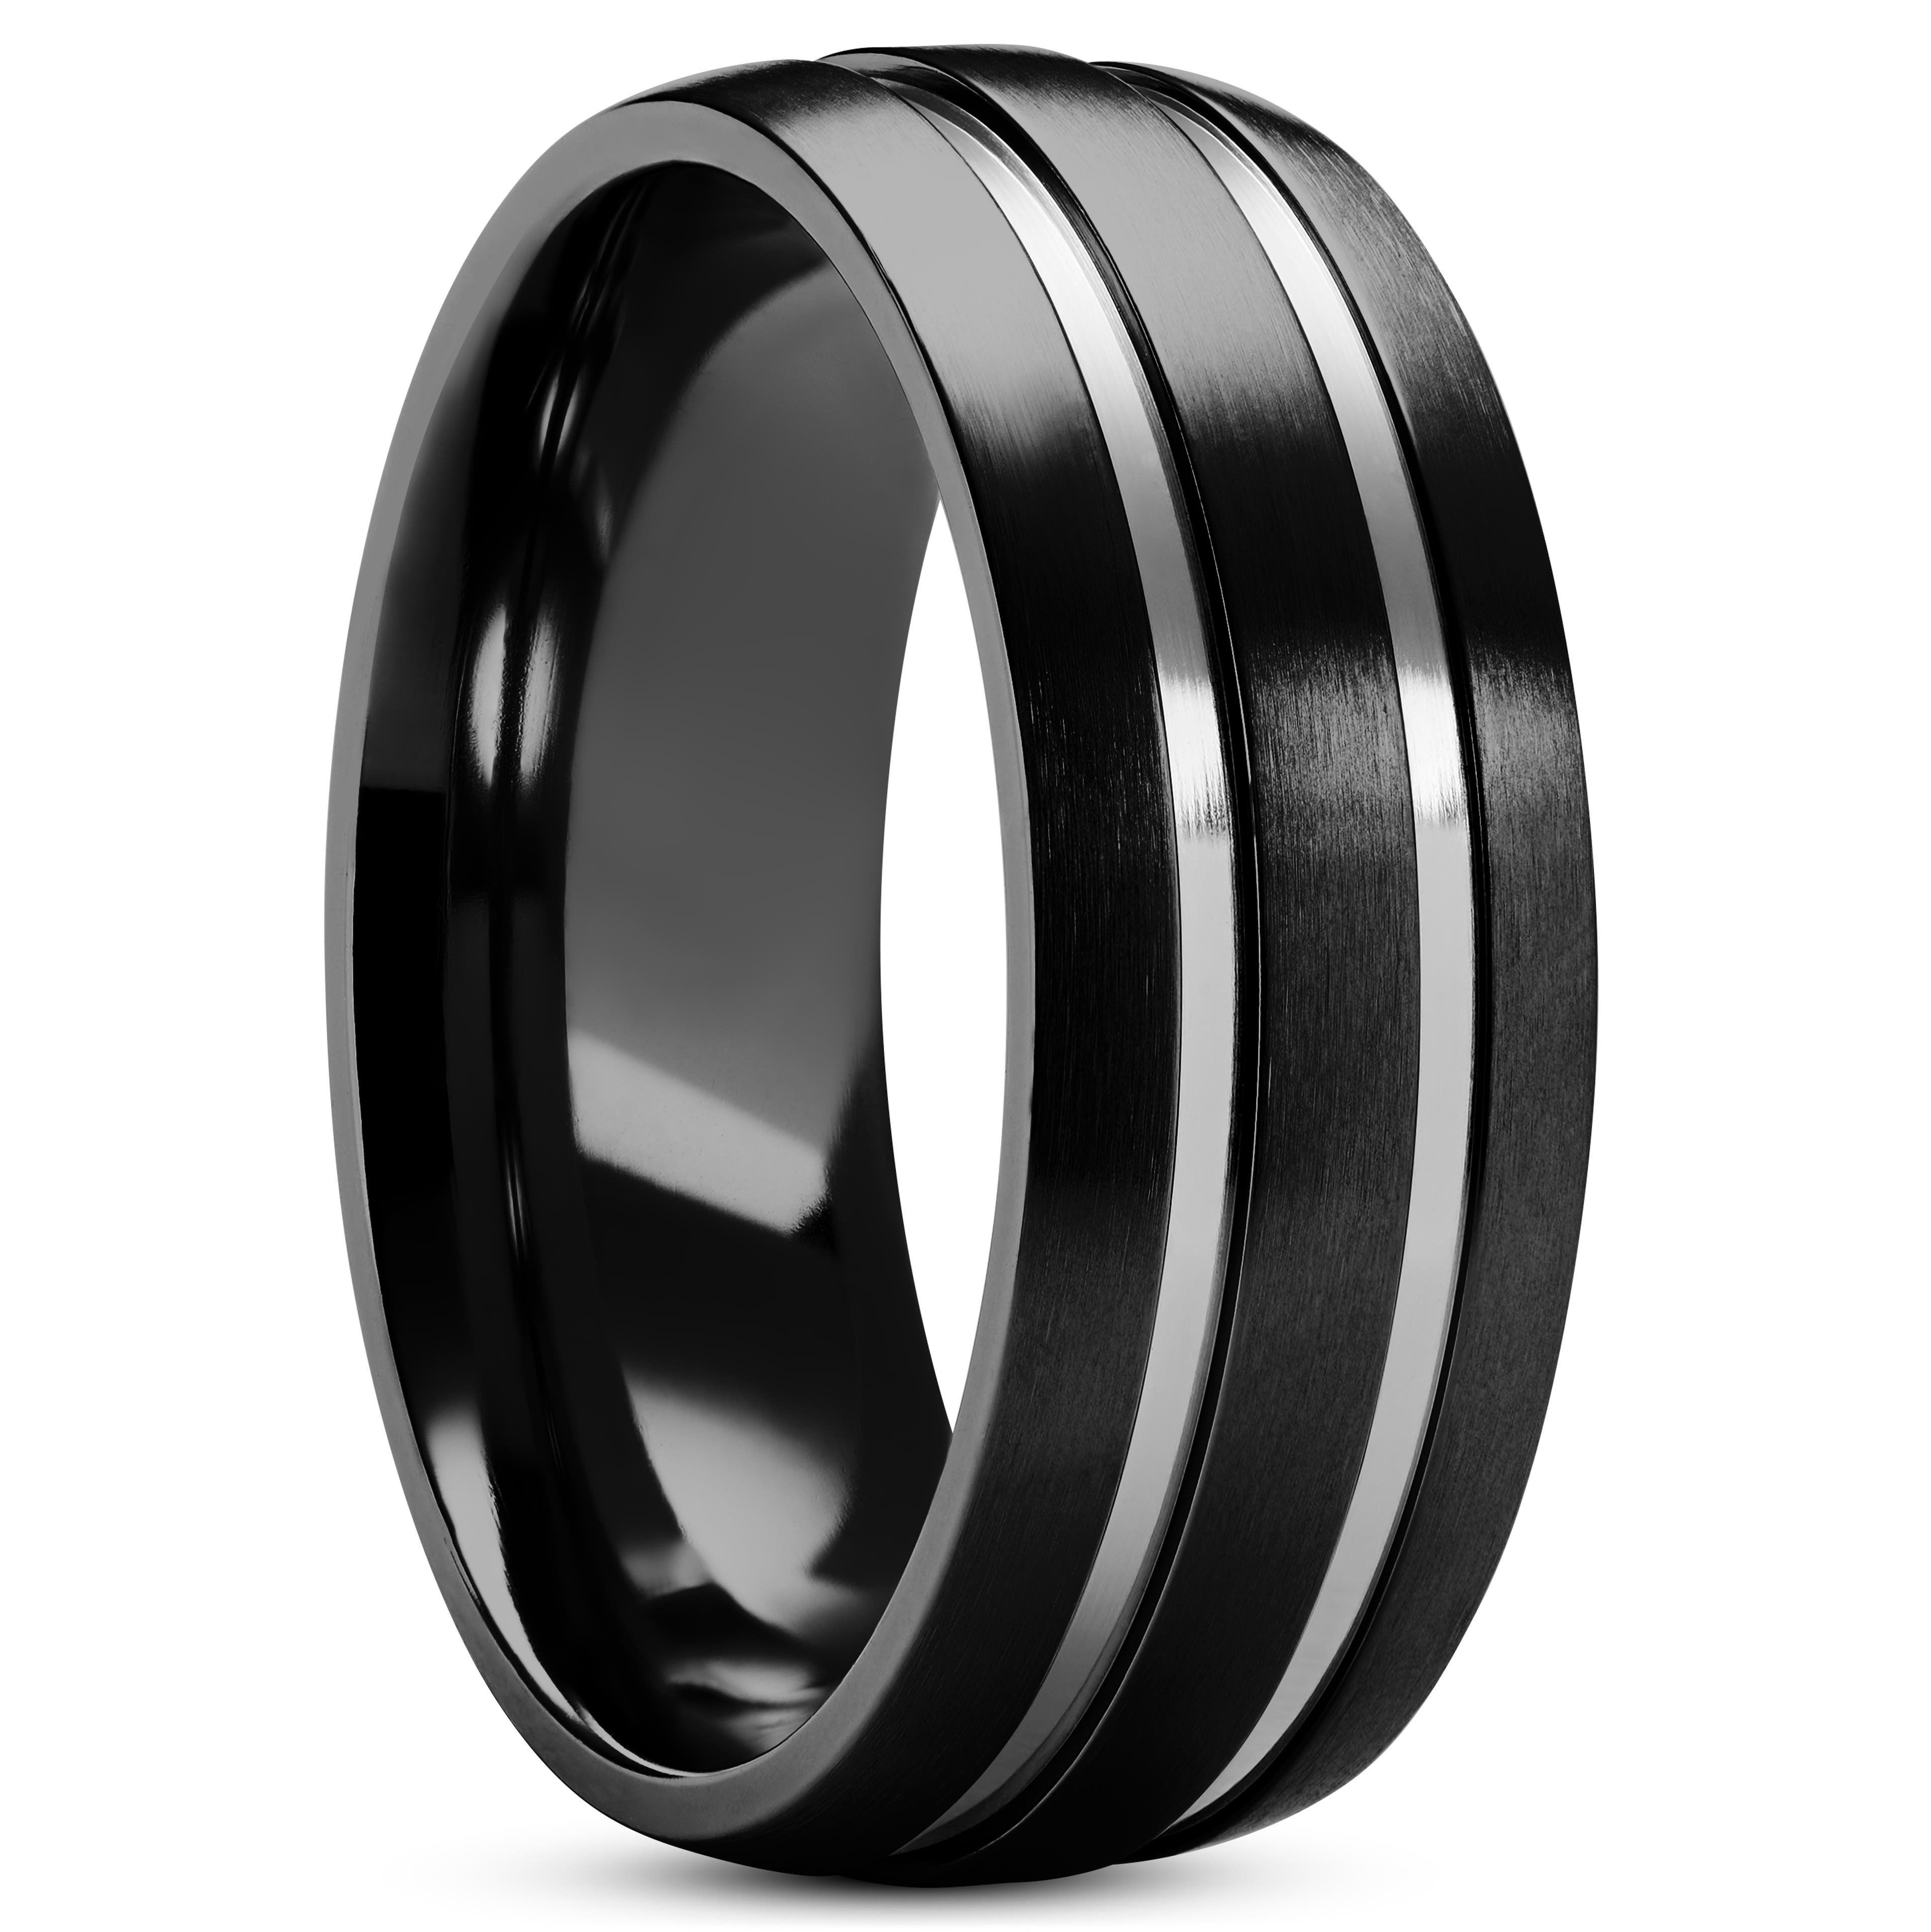 Aesop Reed Black and Silver-tone Titanium Ring